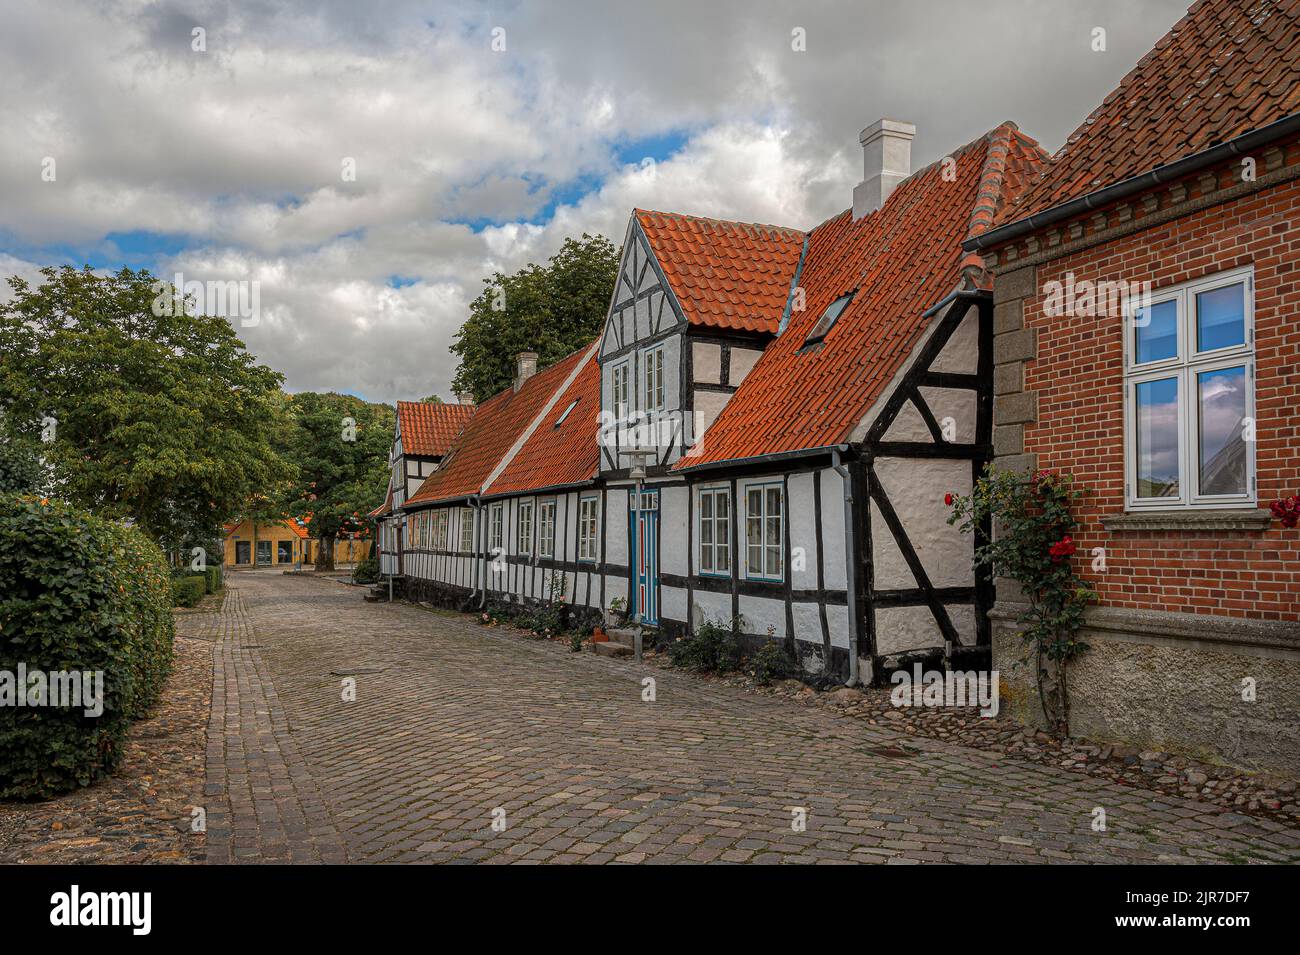 white and black half-timbered picturesque house on a cobbled street in the dansih town Mariager, Denmark, August 6, 2022 Stock Photo